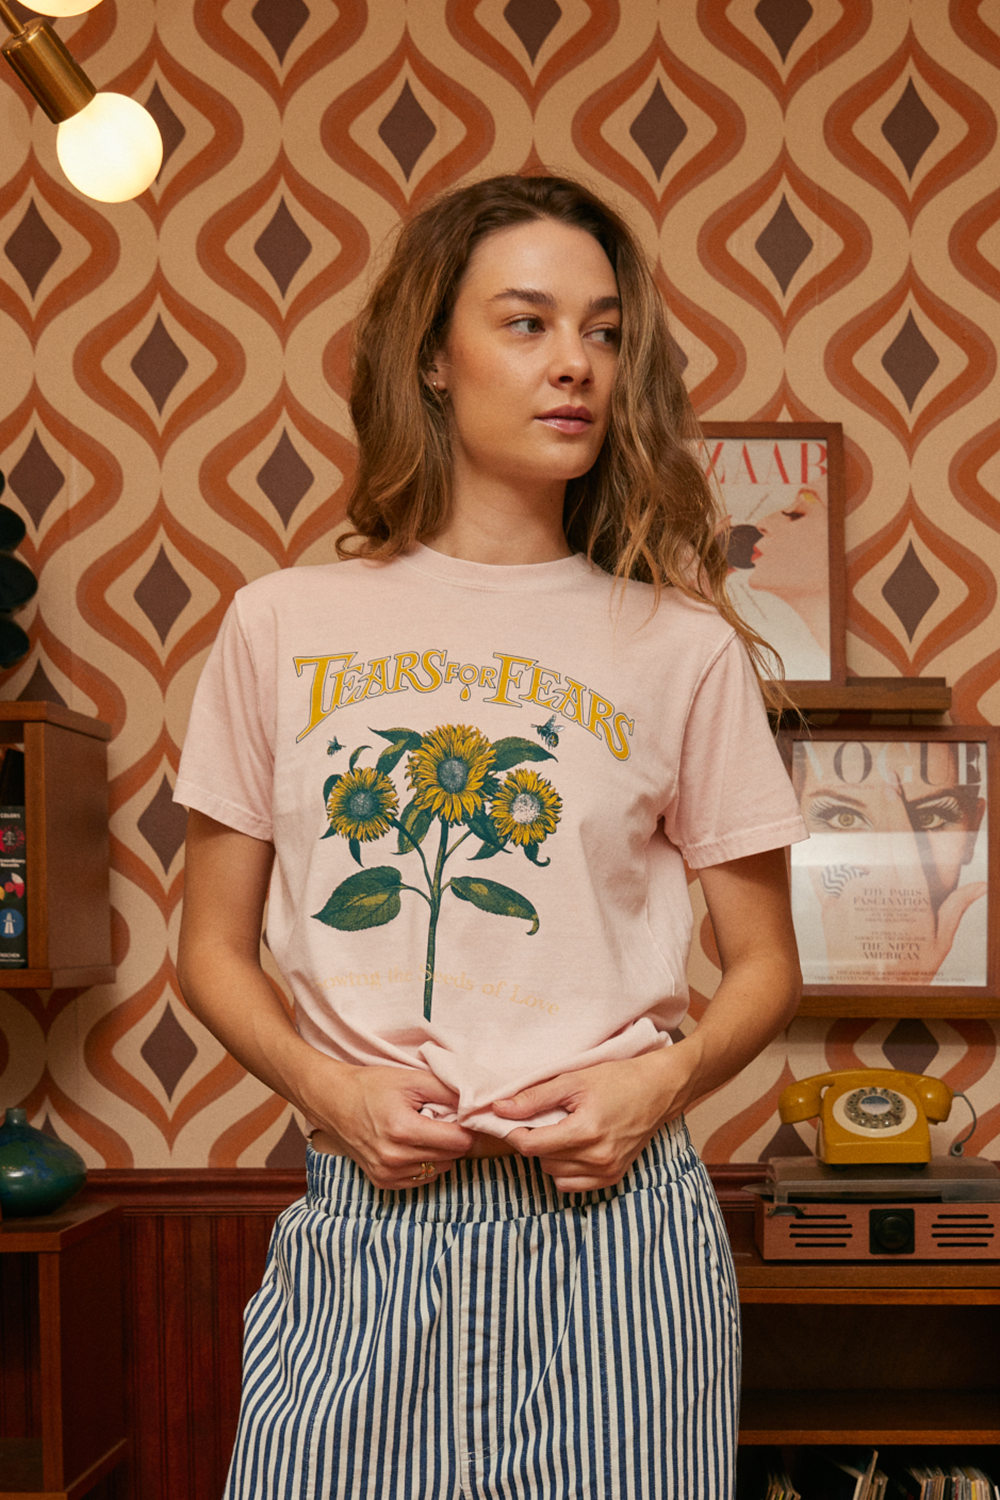 Tears for Fears Sowing the Seeds of Love Tee for her